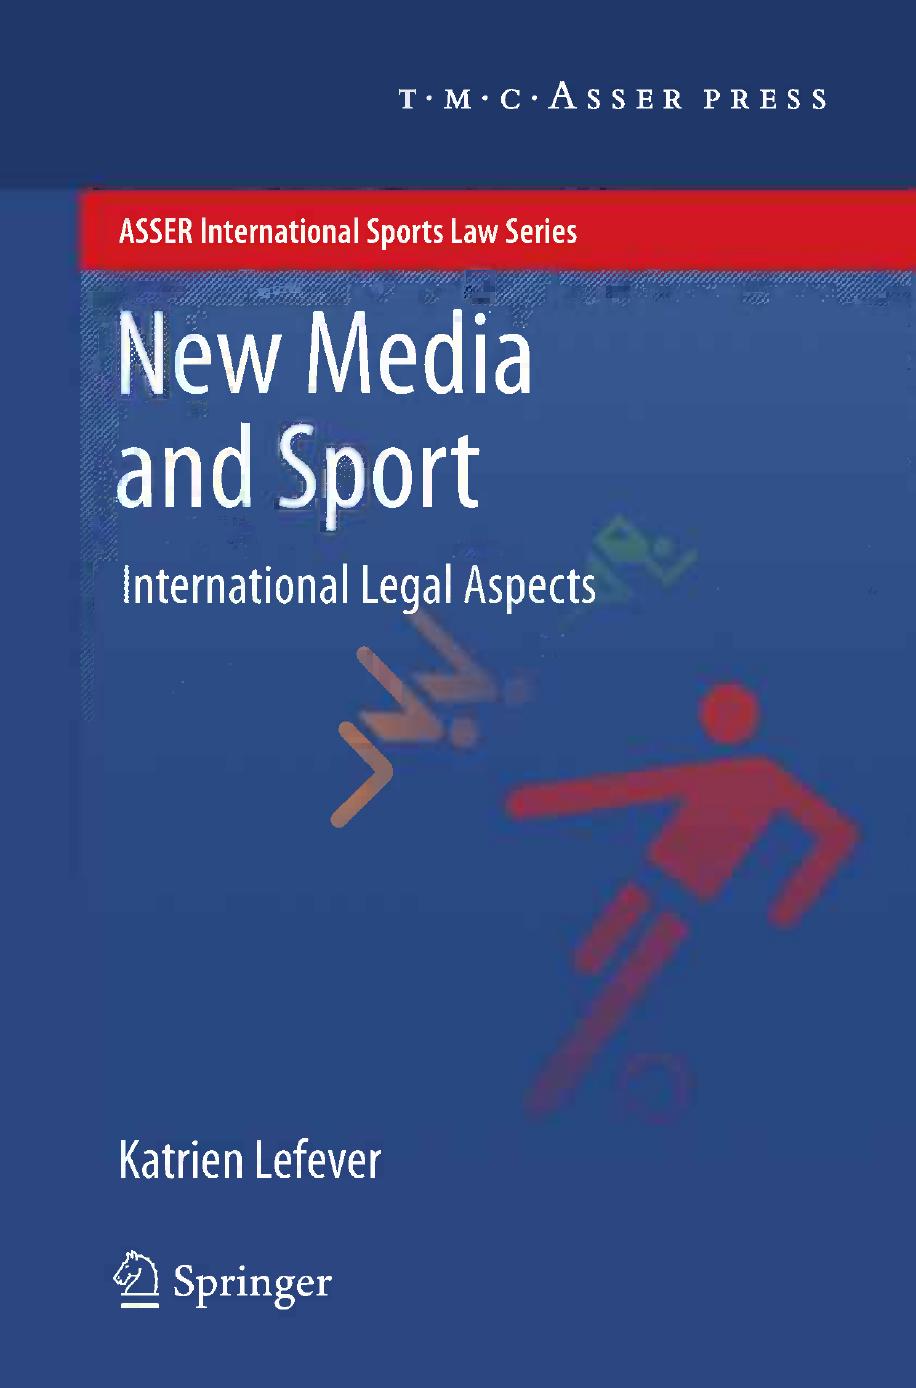 [Katrien Lefever (auth.)] New Media and Sport Int2012